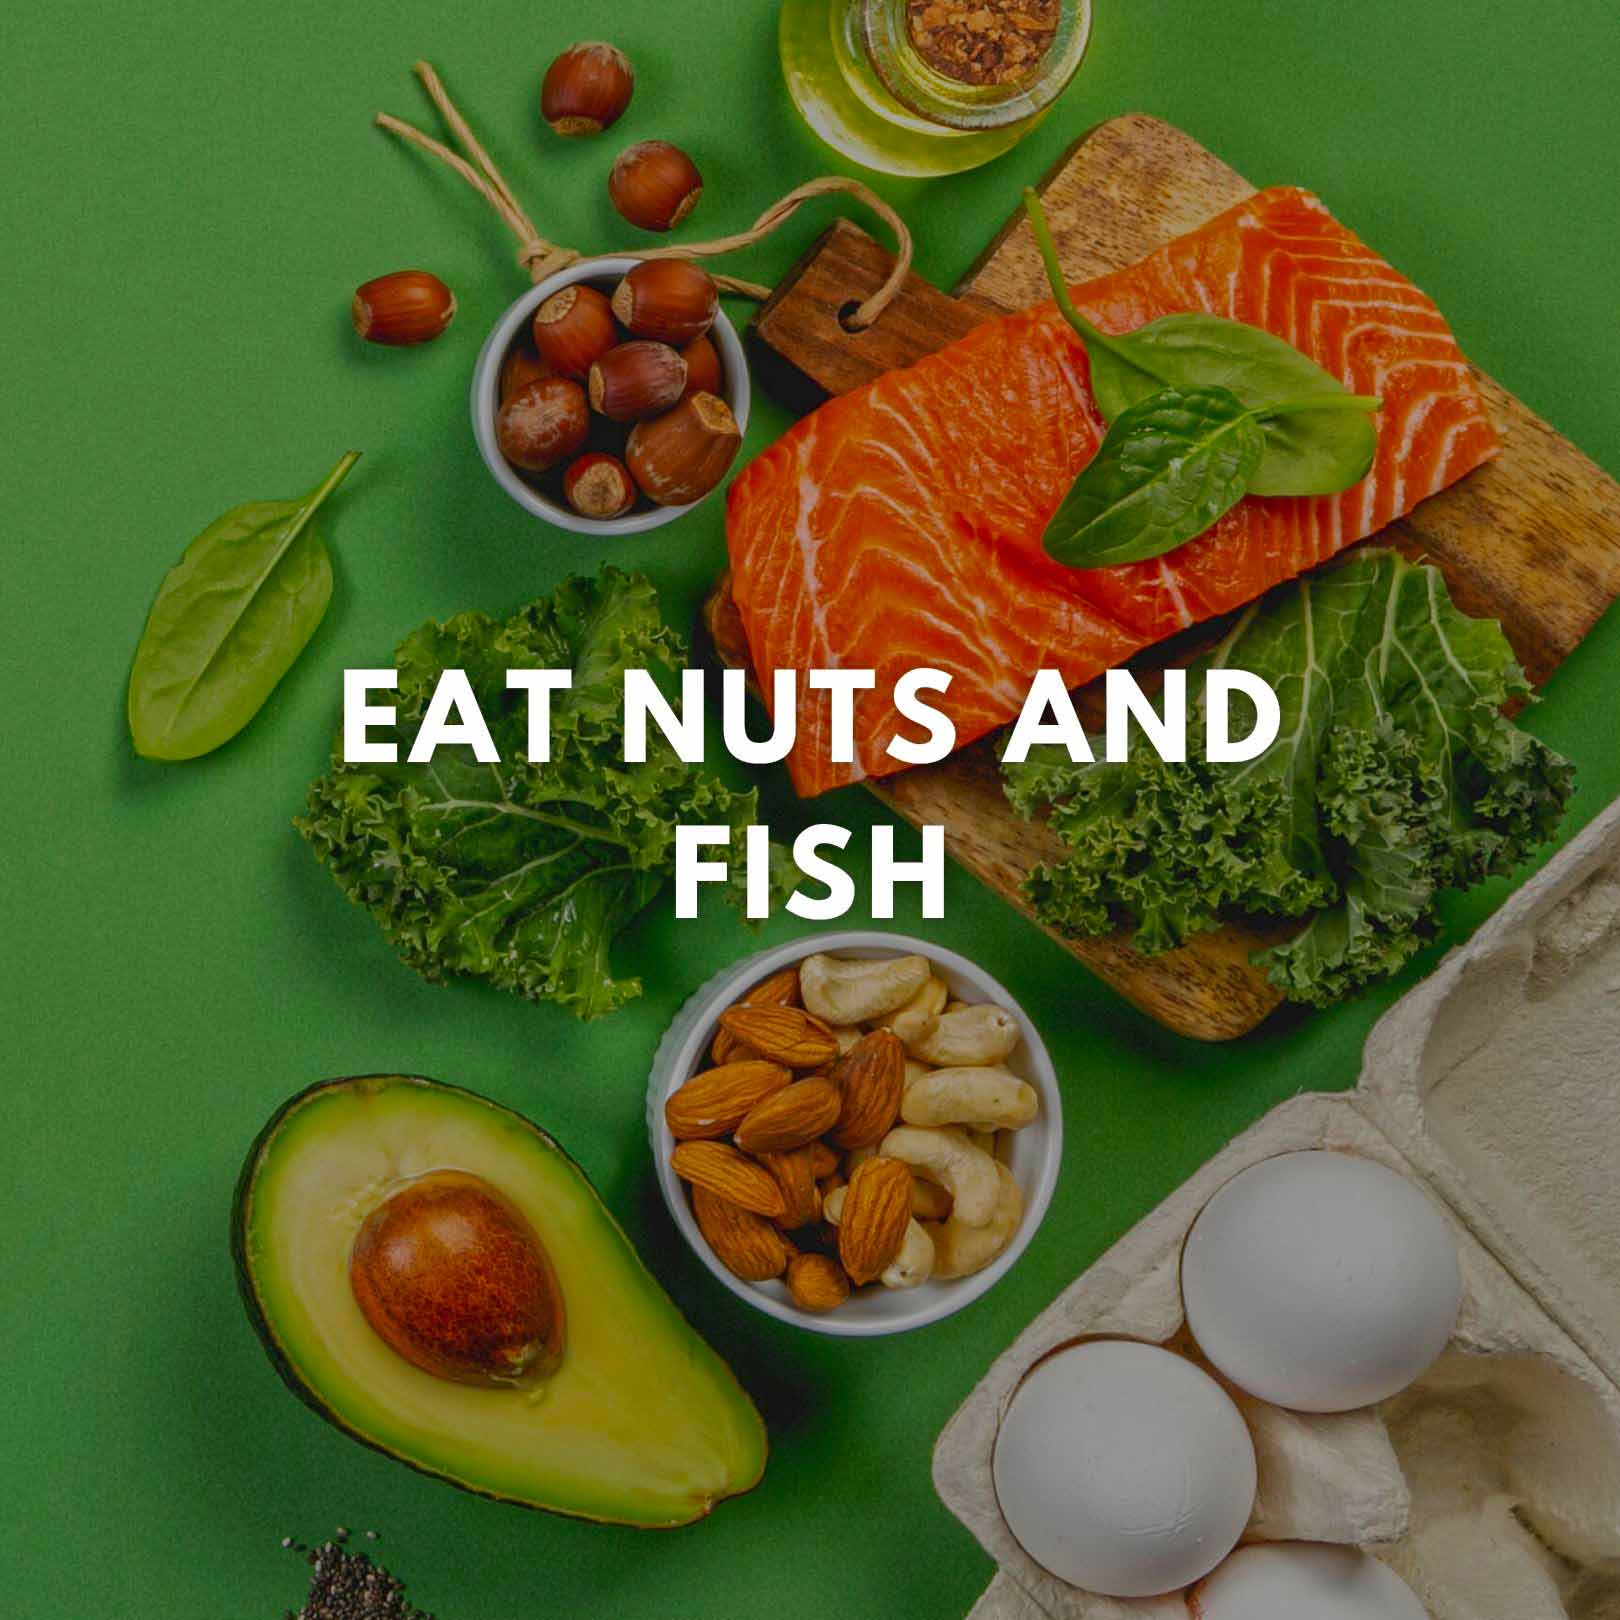 Eat nuts and fish